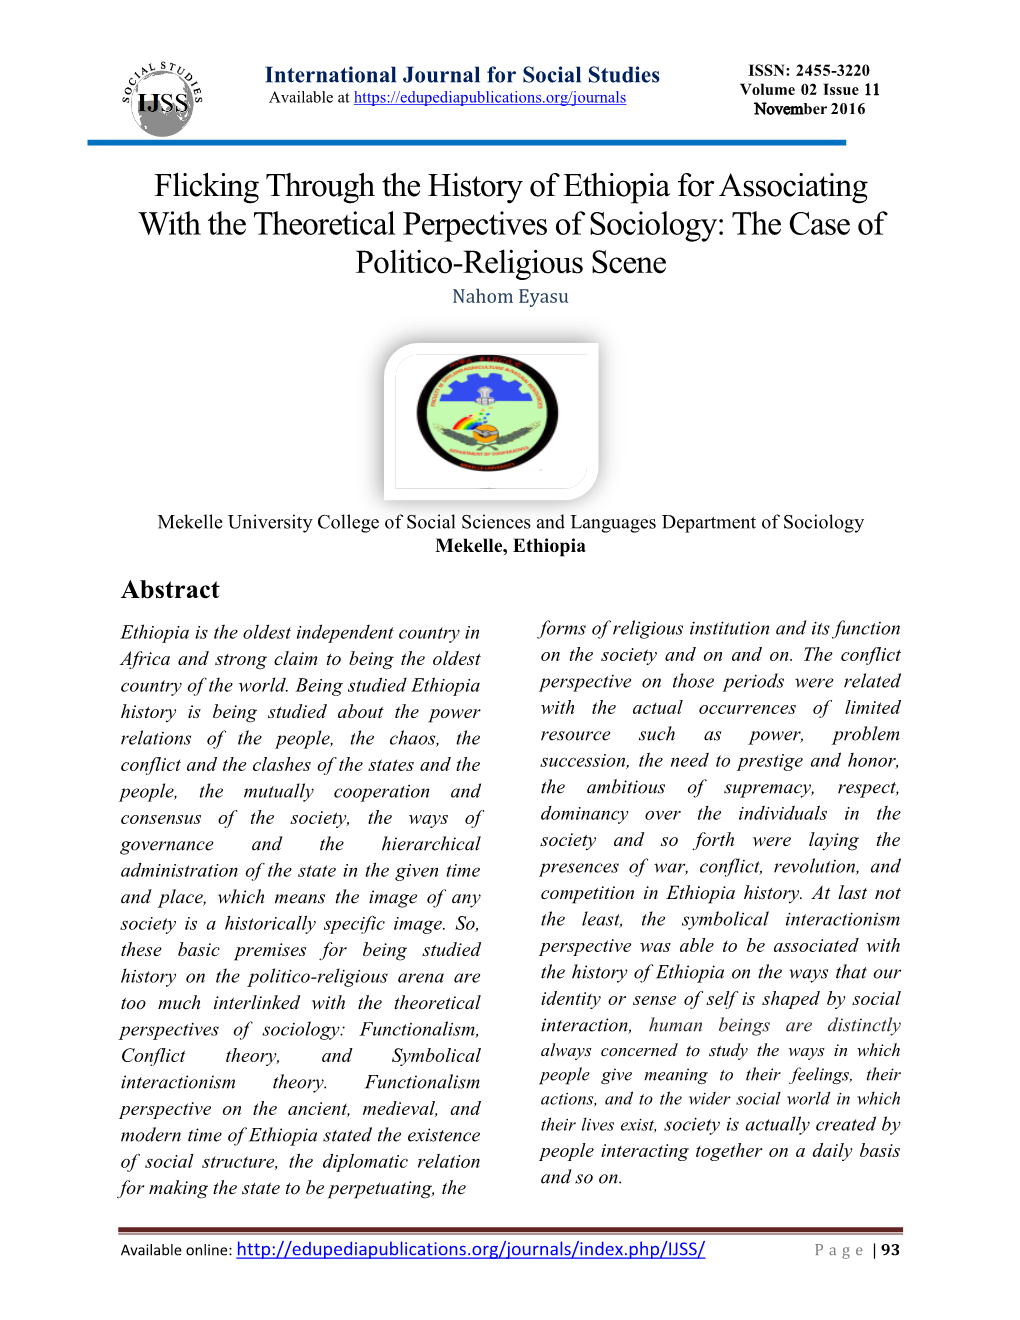 Flicking Through the History of Ethiopia for Associating with the Theoretical Perpectives of Sociology: the Case of Politico-Religious Scene Nahom Eyasu